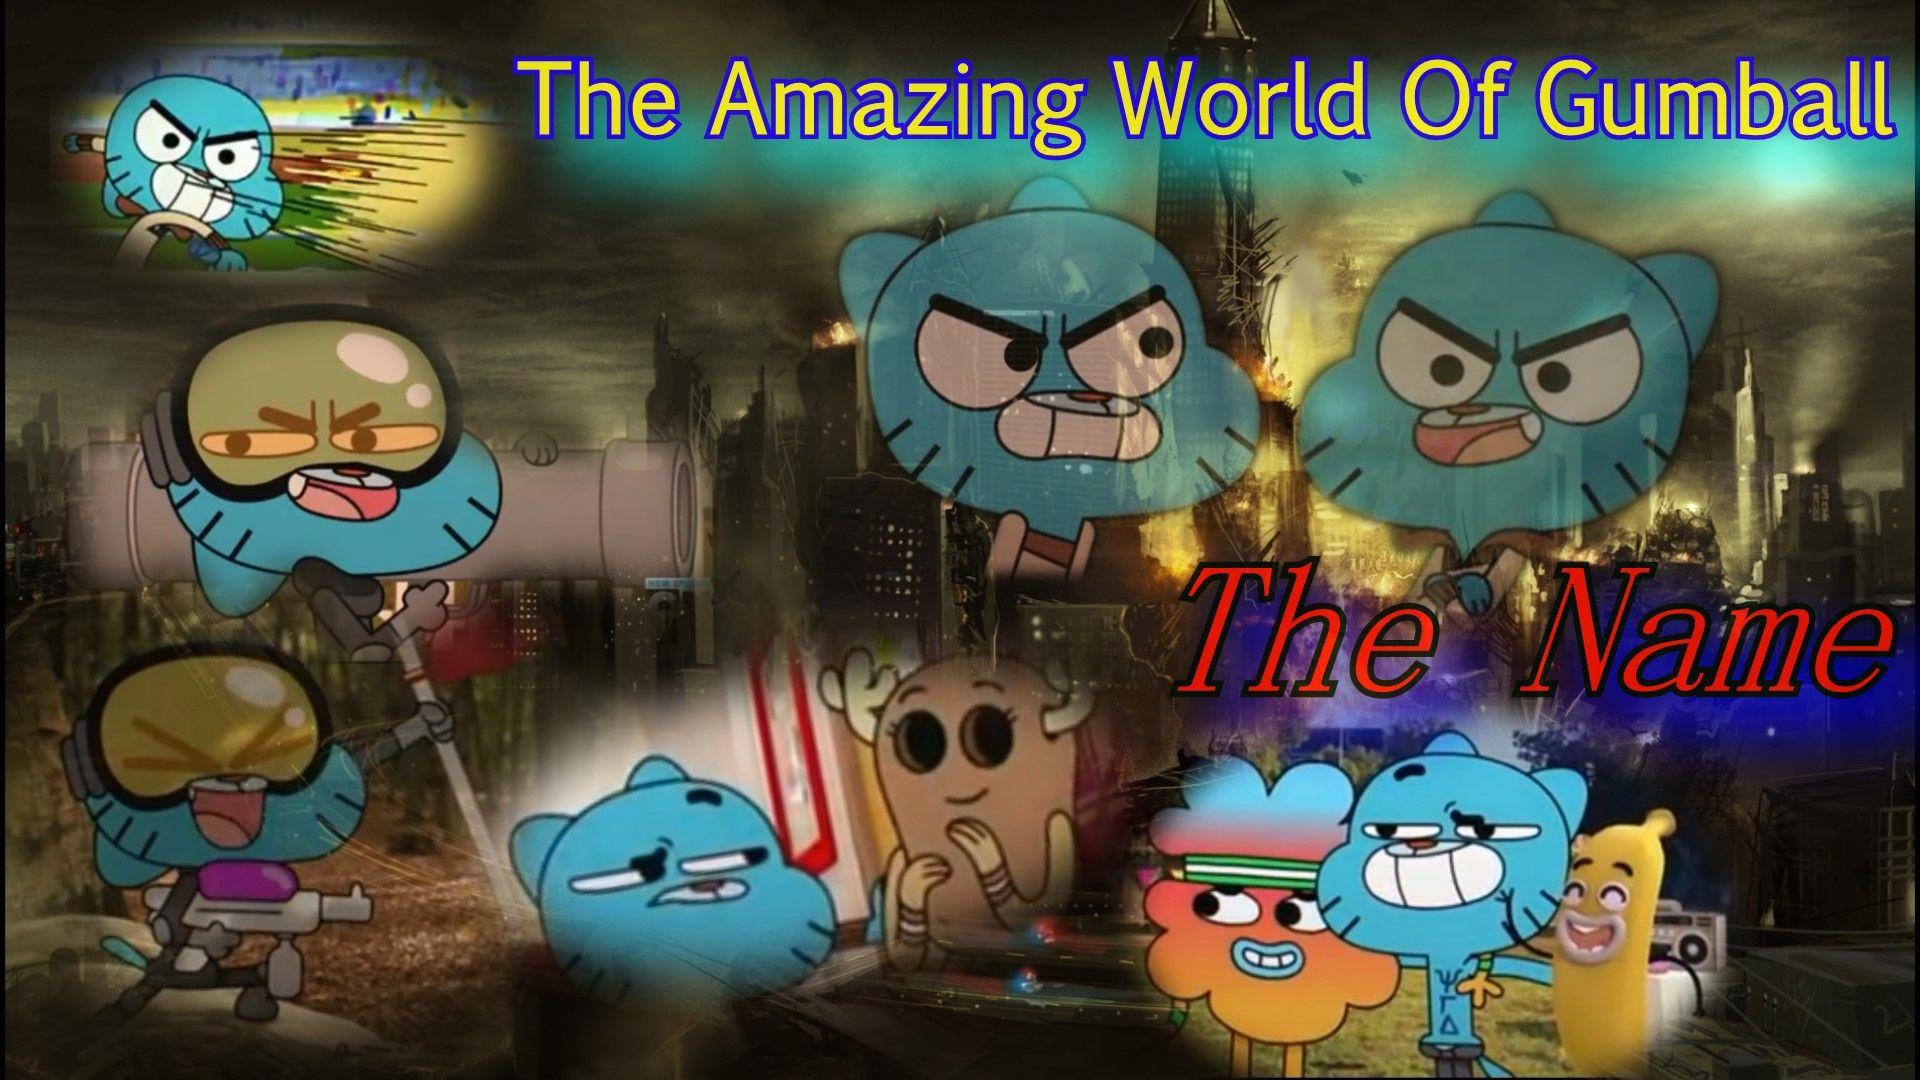 The Amazing World Of Gumball 2017 Wallpapers - Wallpaper Cave